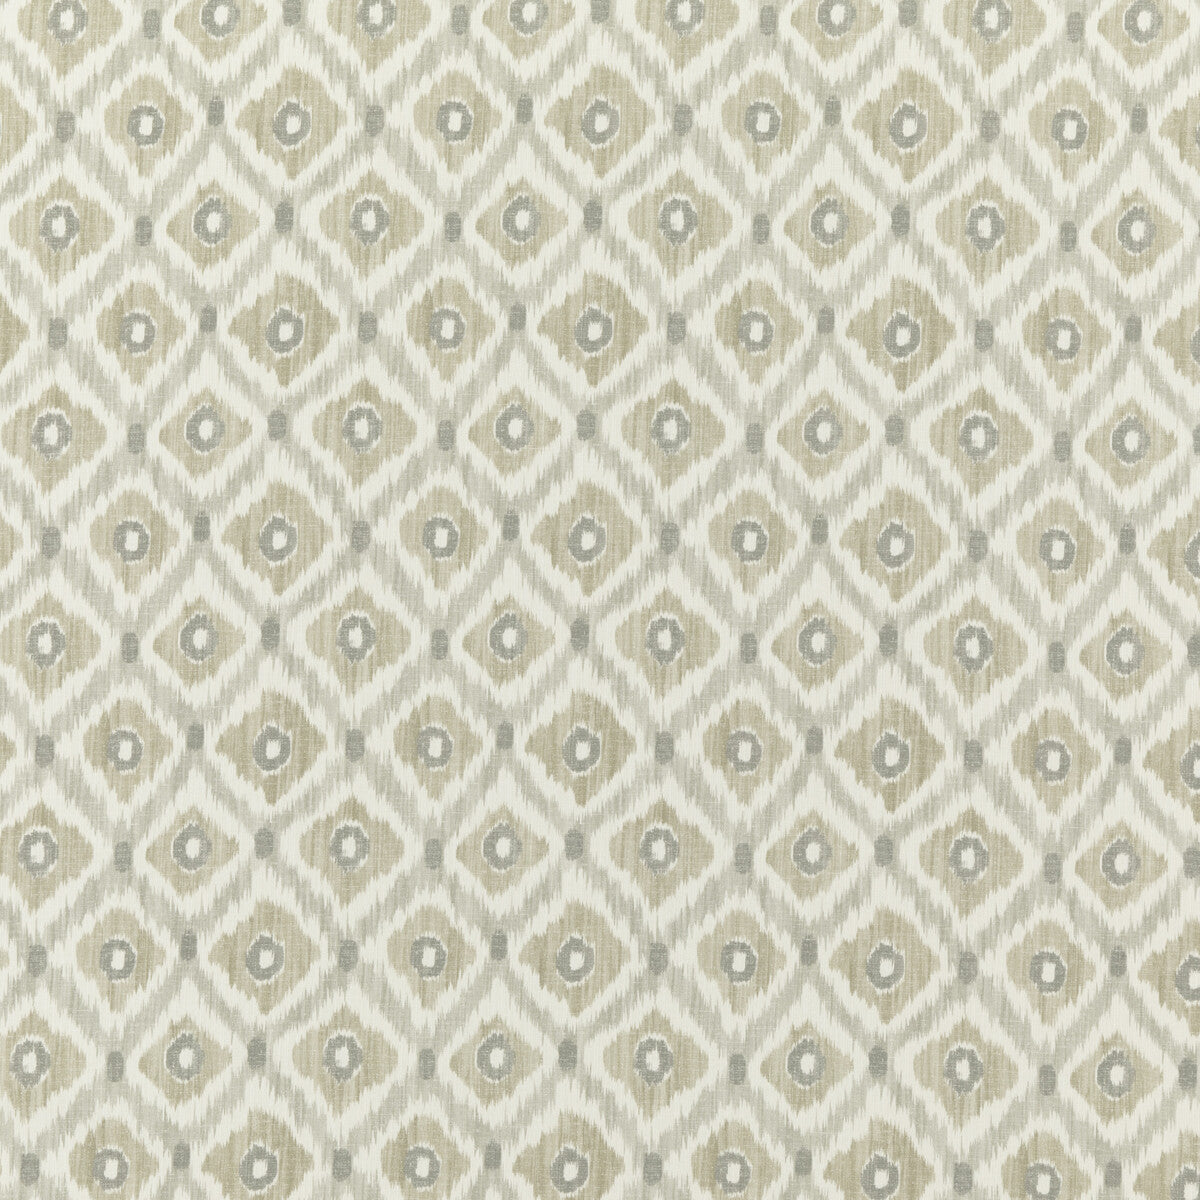 Vasco fabric in stone color - pattern PP50448.2.0 - by Baker Lifestyle in the Homes &amp; Gardens III collection